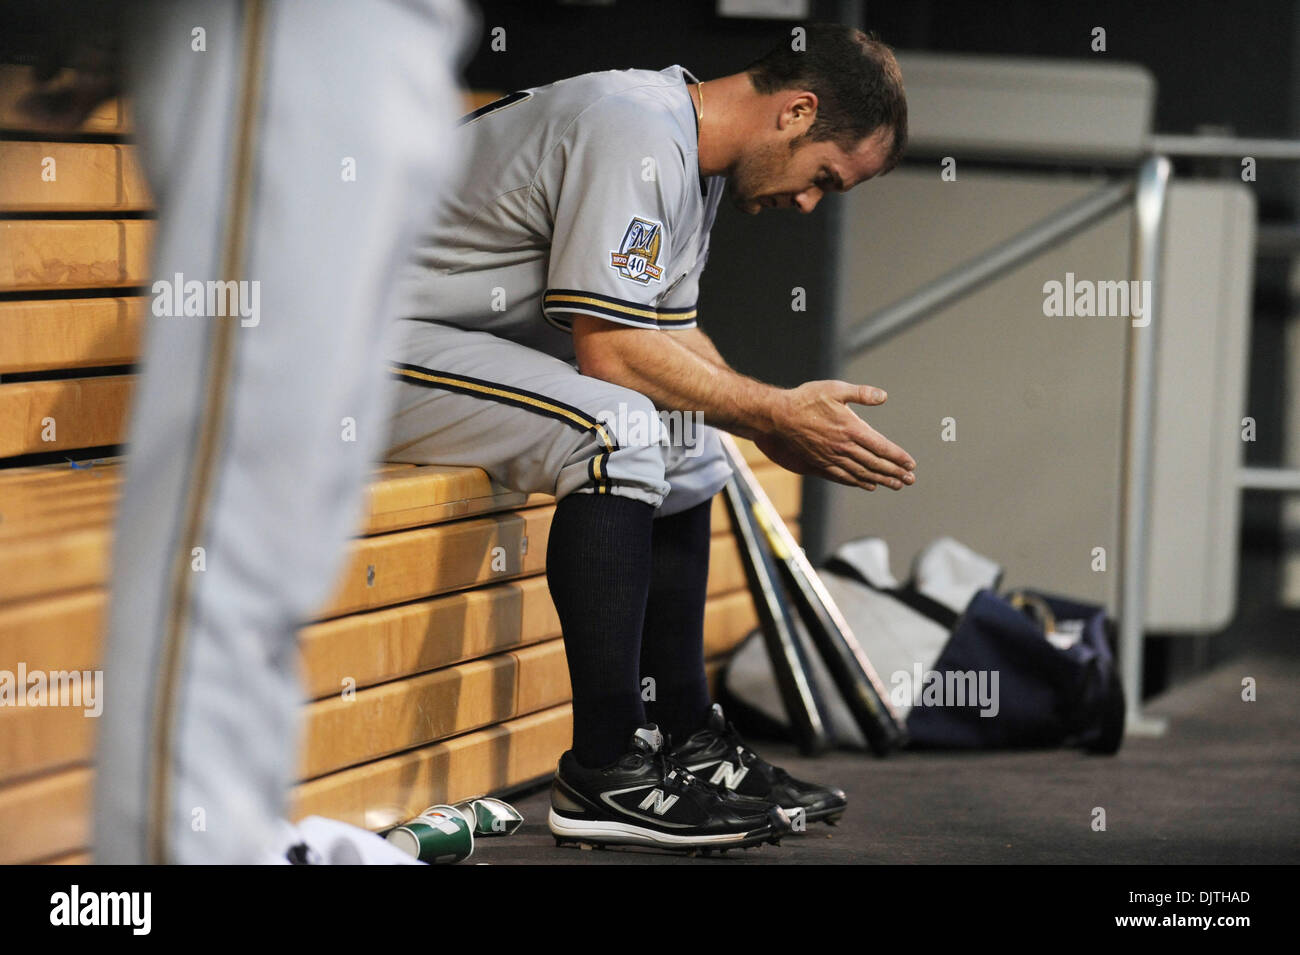 Milwaukee Brewers starting pitcher Dave Bush #31 in the dugout after being pulled in the 1st inning of the Twins'  baseball game against the Milwaukee Brewers at Target Field in Minneapolis, Minnesota.  Bush walked in the 1st run for the Twins and the Twins scored 7 runs that inning. (Credit Image: © Marilyn Indahl/Southcreek Global/ZUMApress.com) Stock Photo